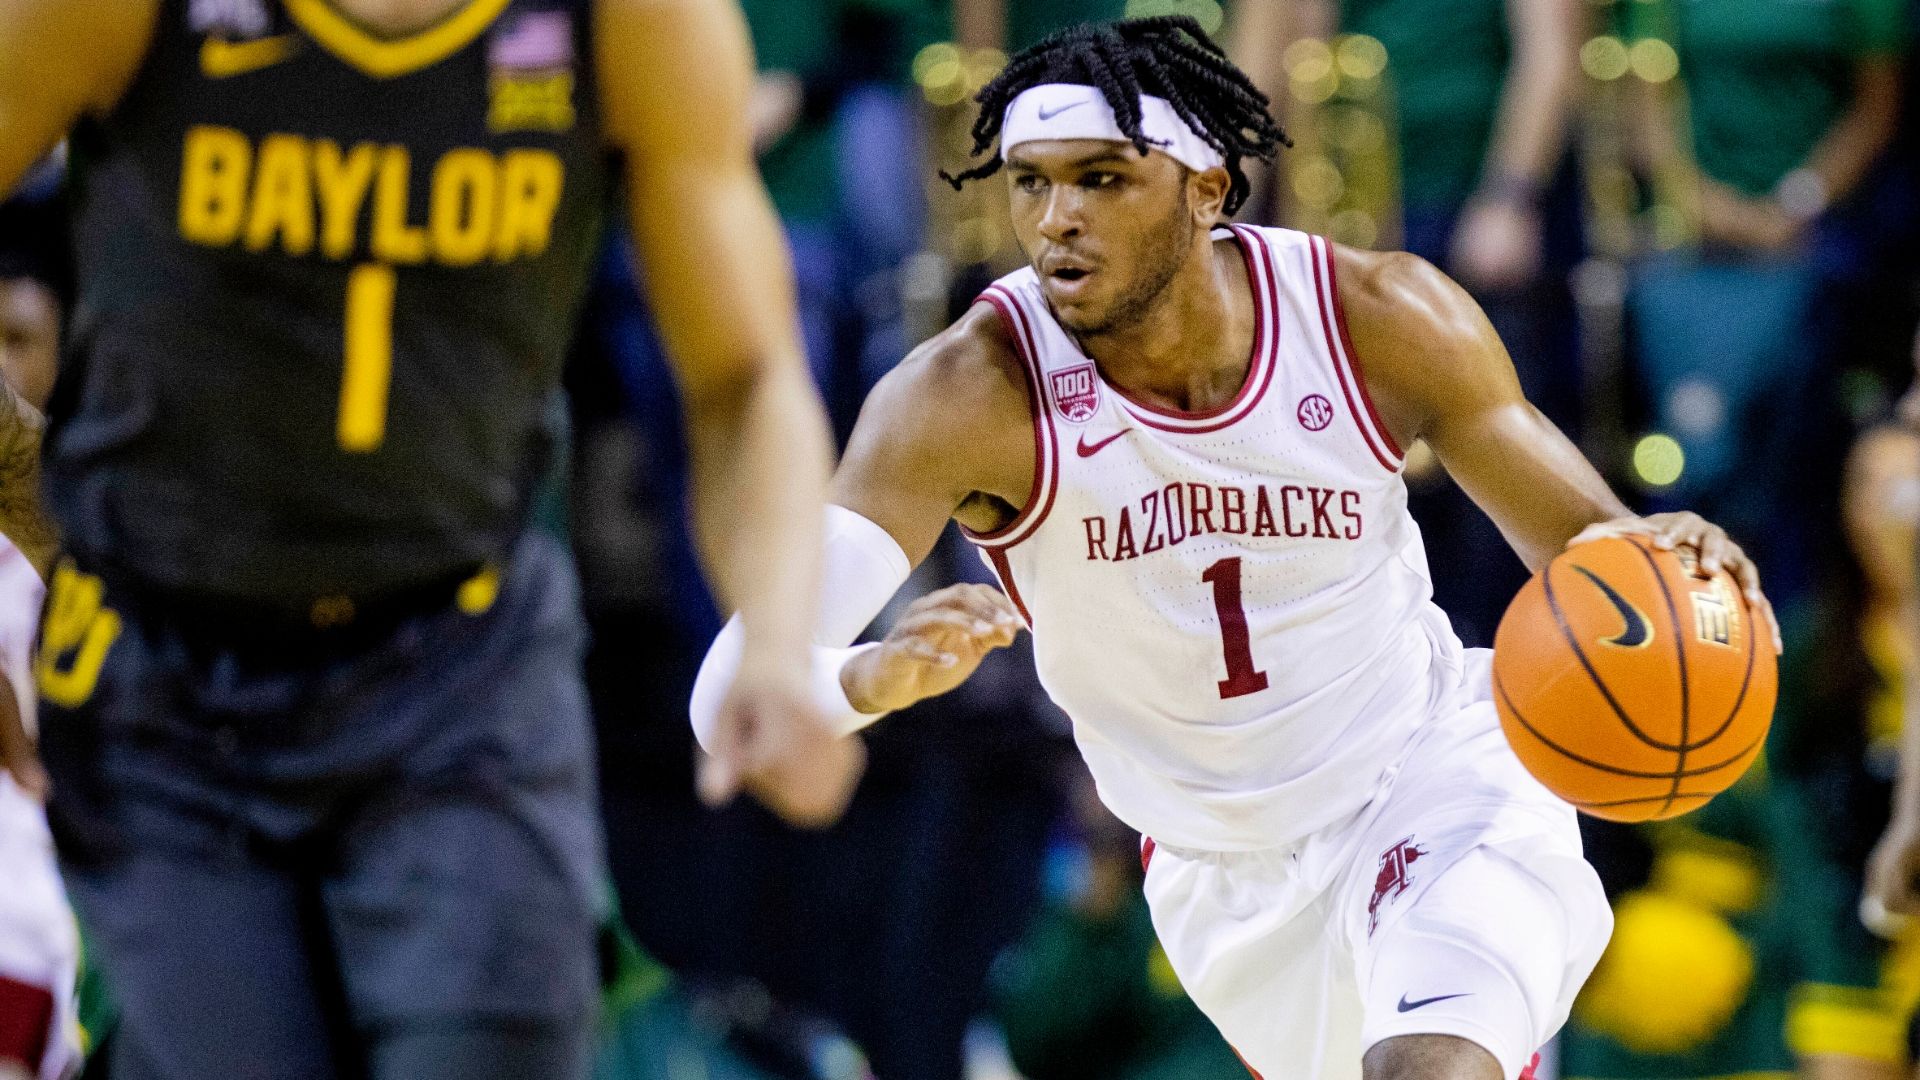 Council IV's 25 not enough in Hogs' loss to Baylor